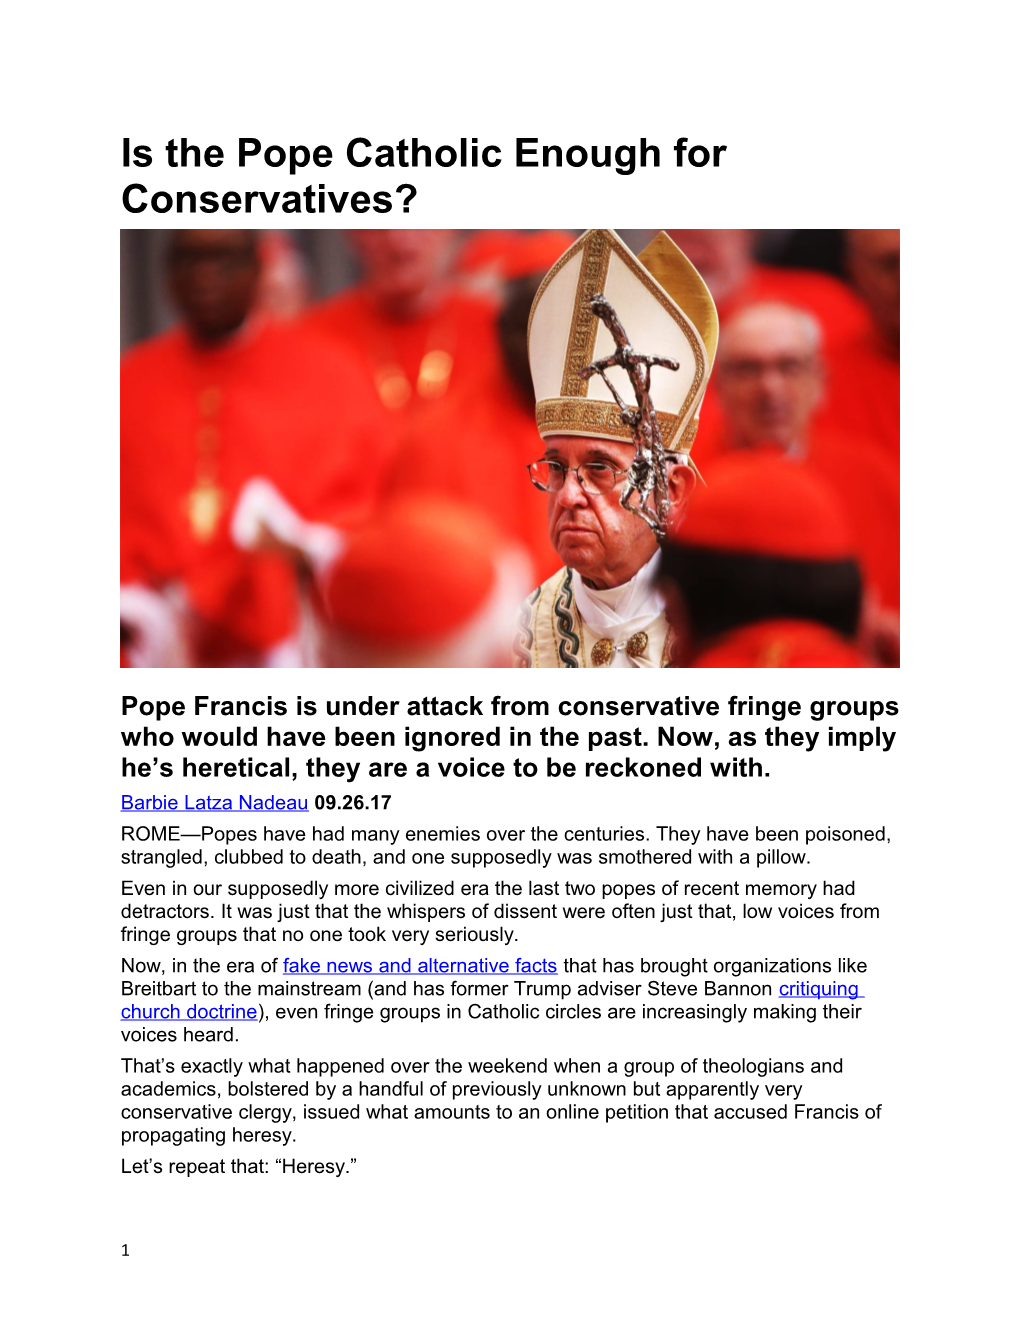 Is the Pope Catholic Enough for Conservatives?